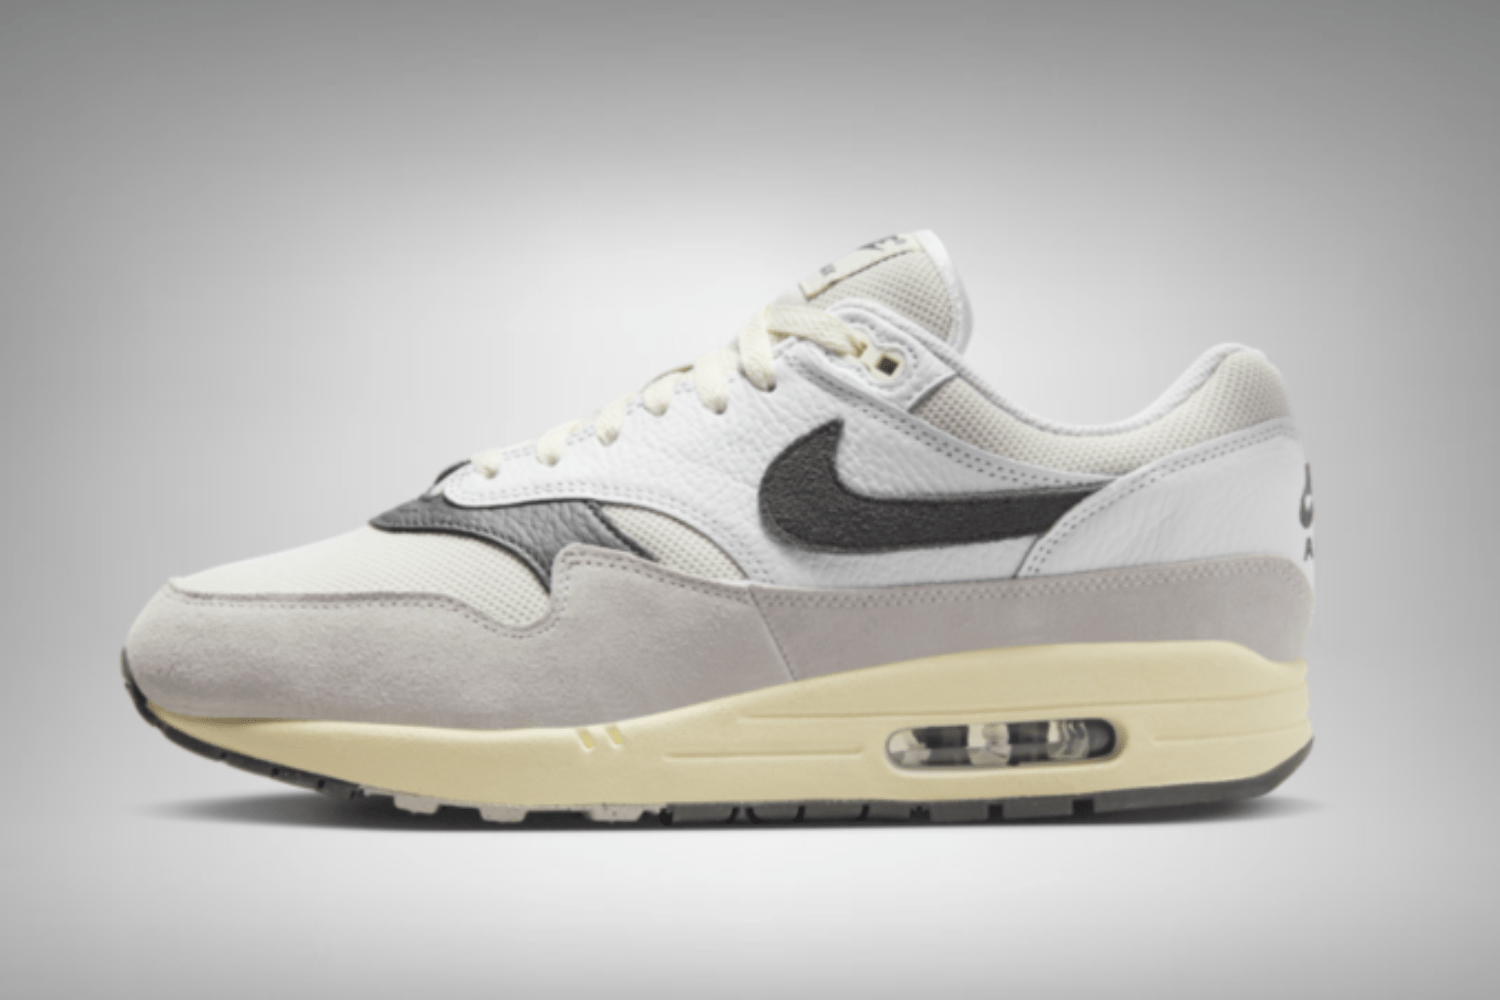 The Nike Air Max 1 'Greyscale' is now available